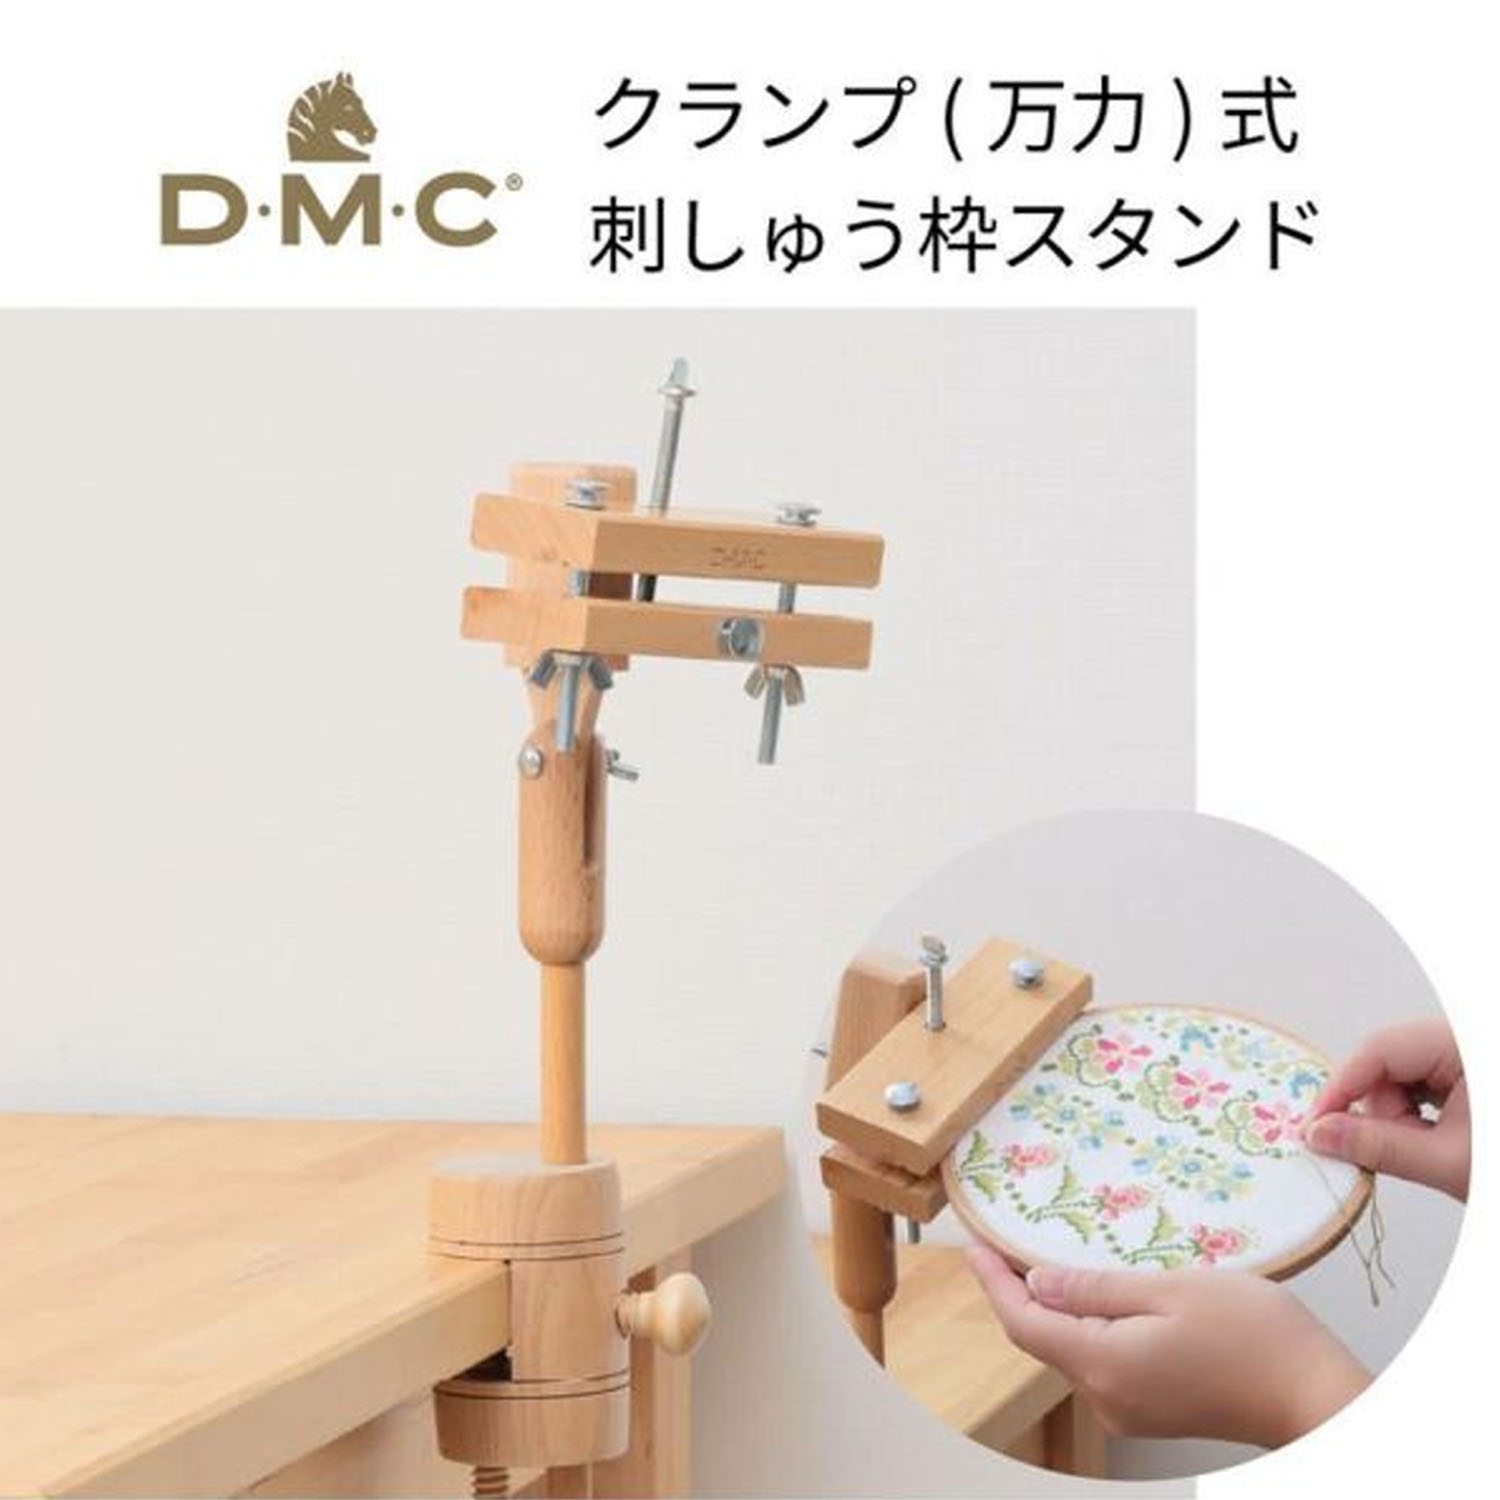 DMC-MK0035 Clamp type, embroidery frame stand(pcs)